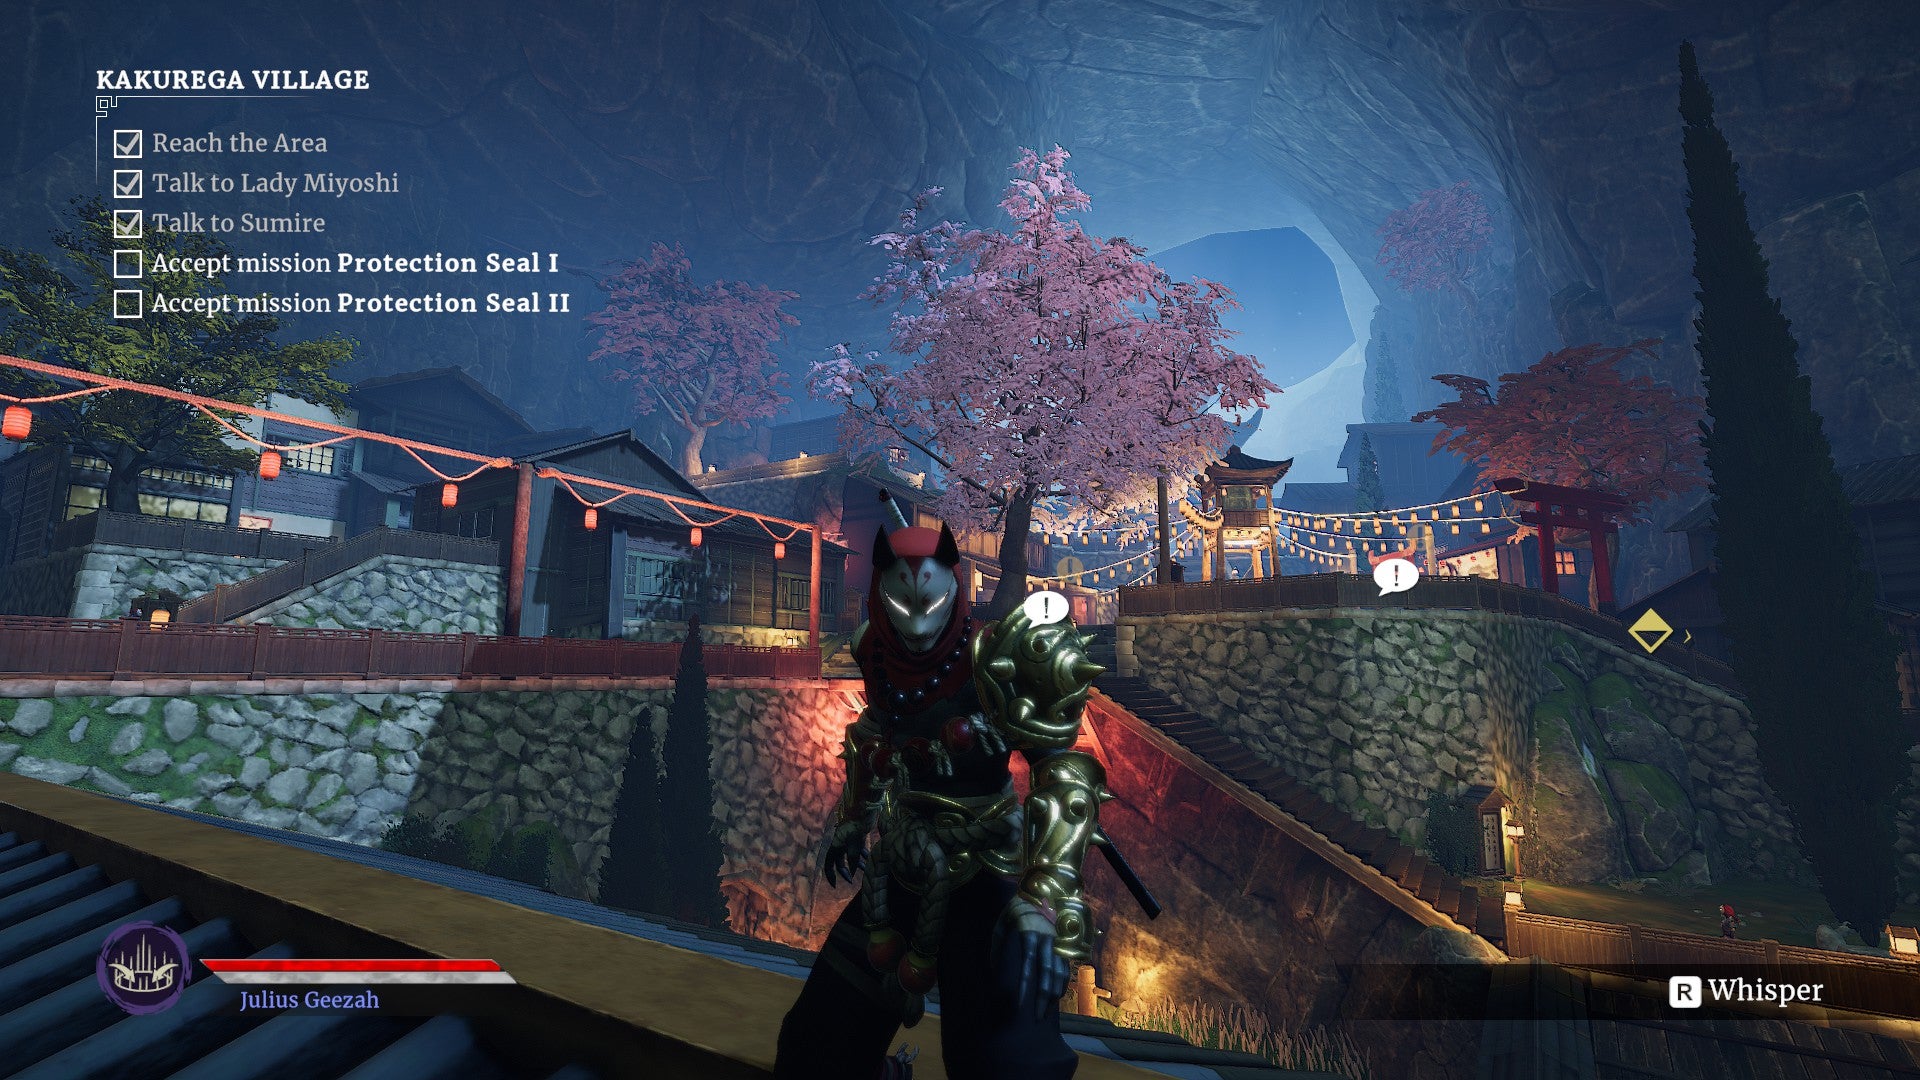 A ninja in a kitsune fox mask stands in front of a village inside a huge cave in Aragami 2